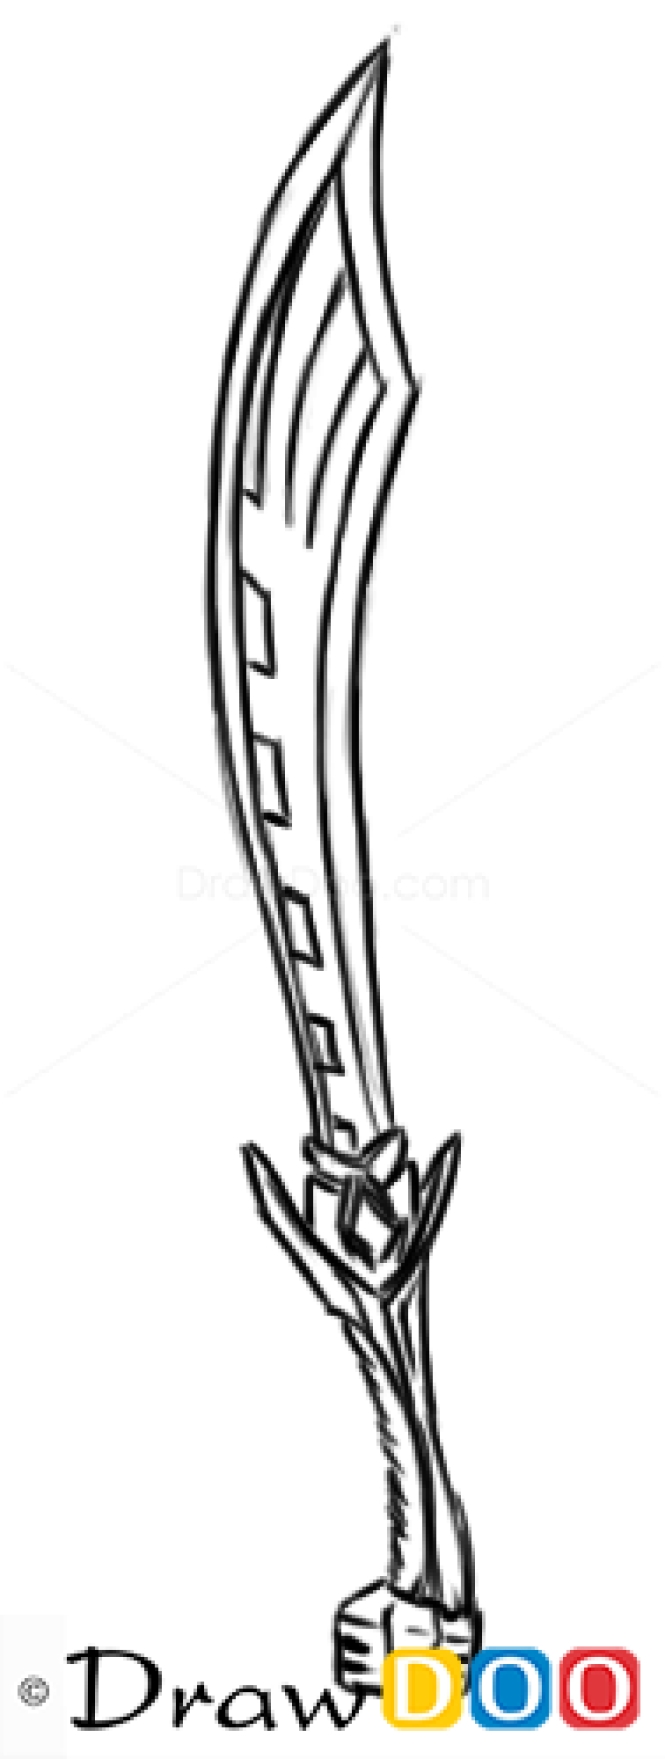 How to Draw Warhammer Game Sword, Cold Arms